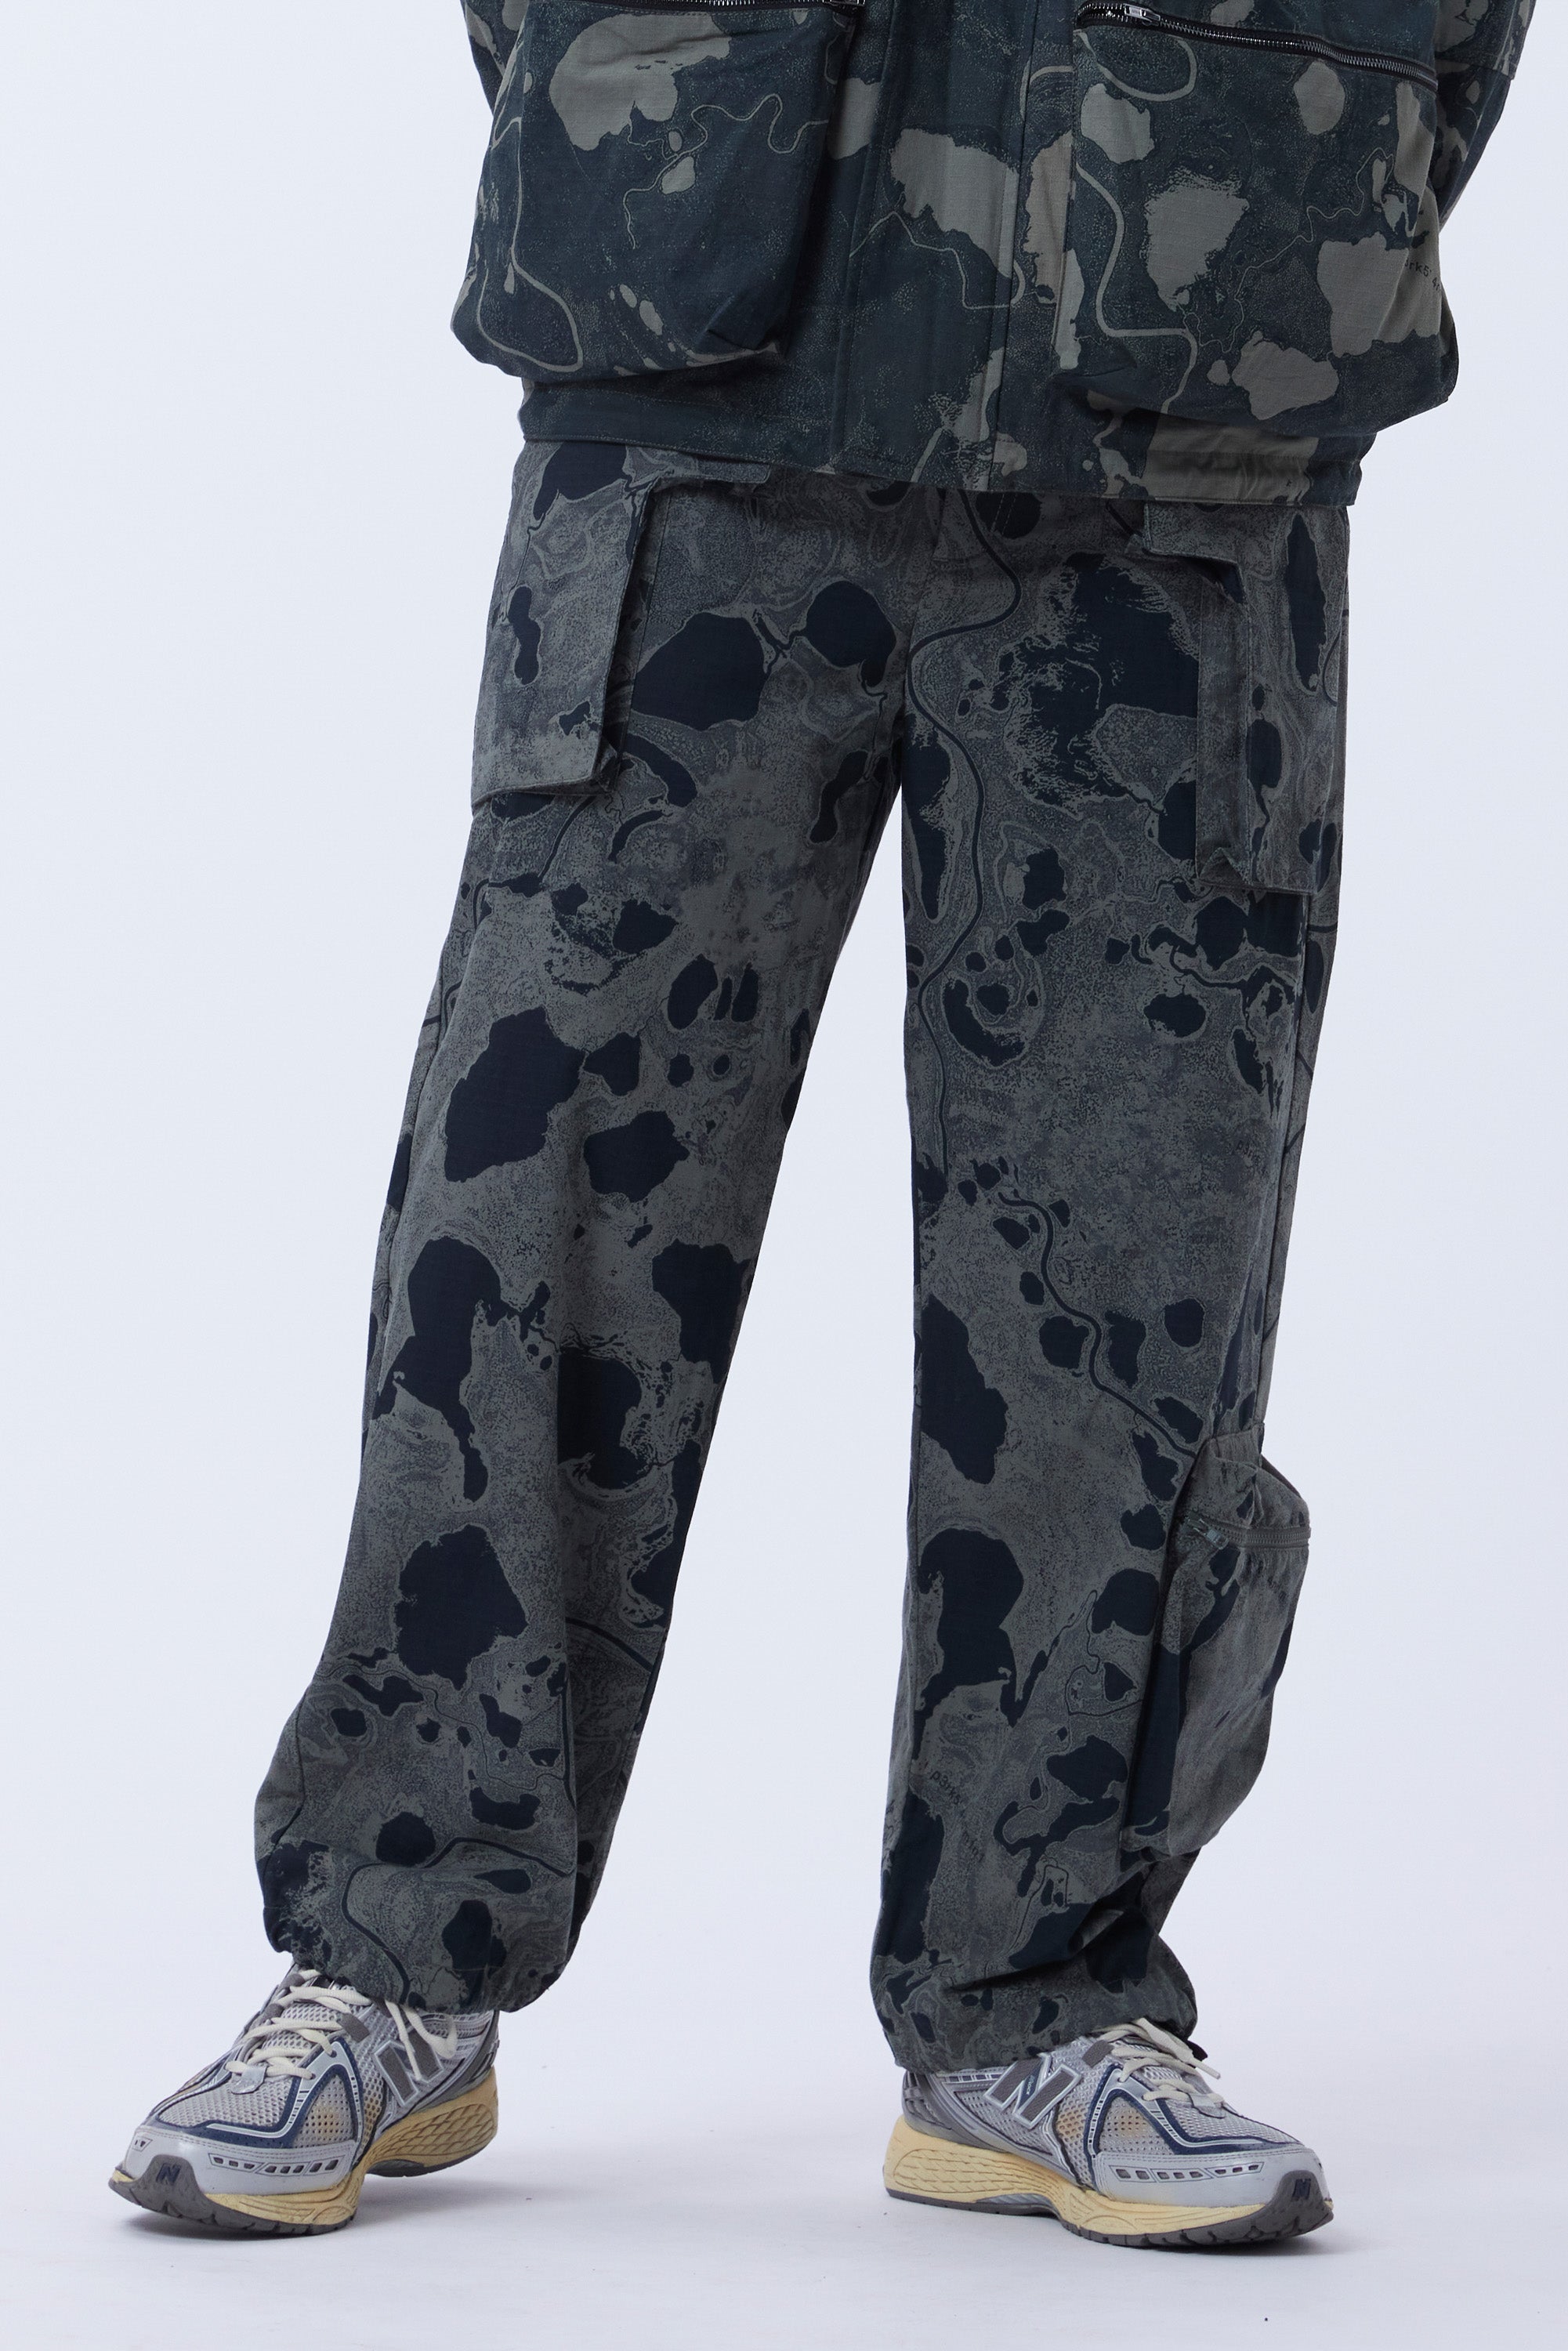 P.A.M. Geo Mapping Printed Pants - Pond - Due West